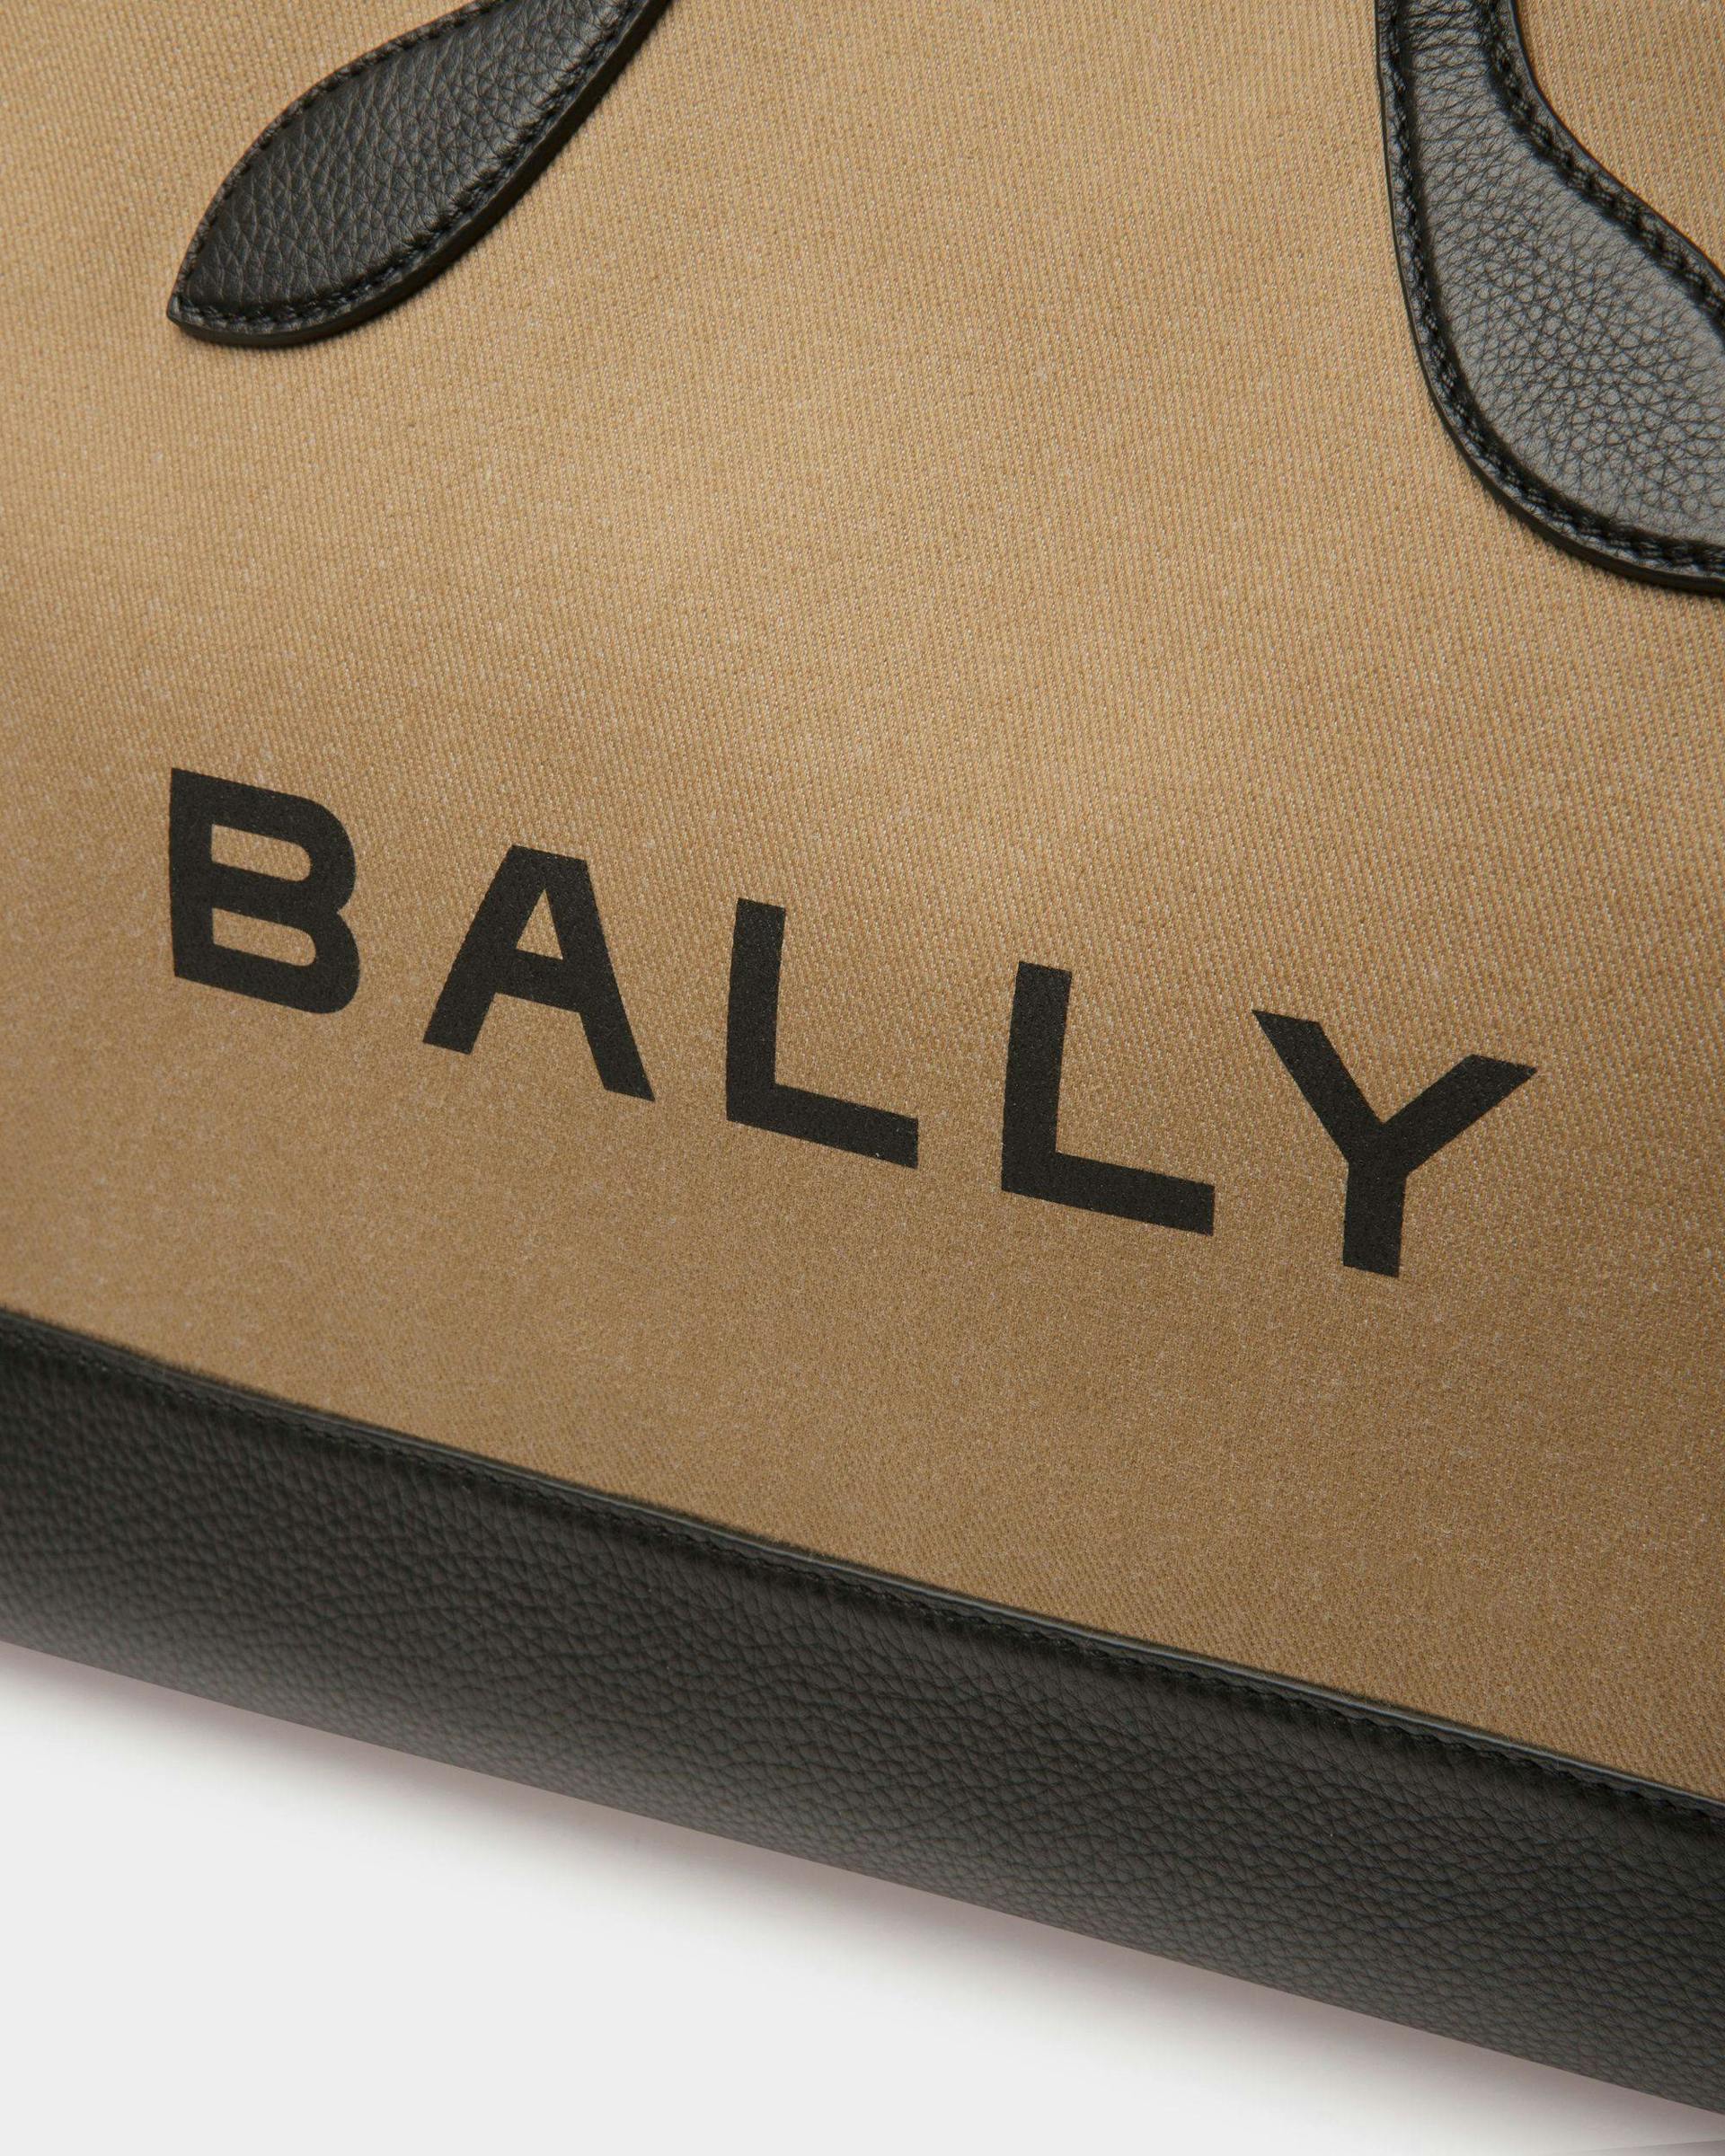 Women's Bar Tote Bag In Sand And Black Fabric | Bally | Still Life Detail